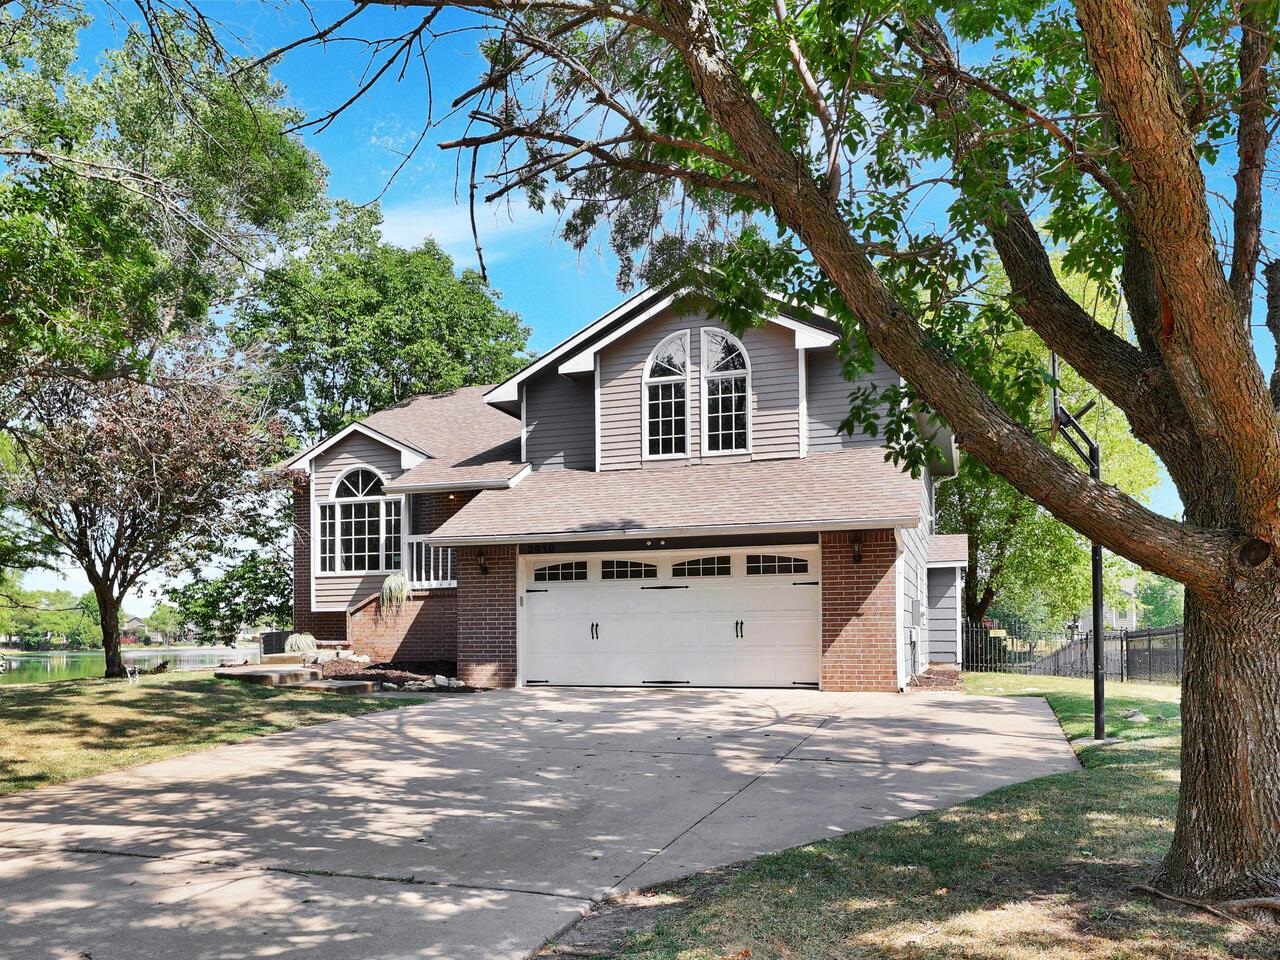 WELCOME HOME! This residence is located in south Derby nestled among many mature trees on a .70 acre